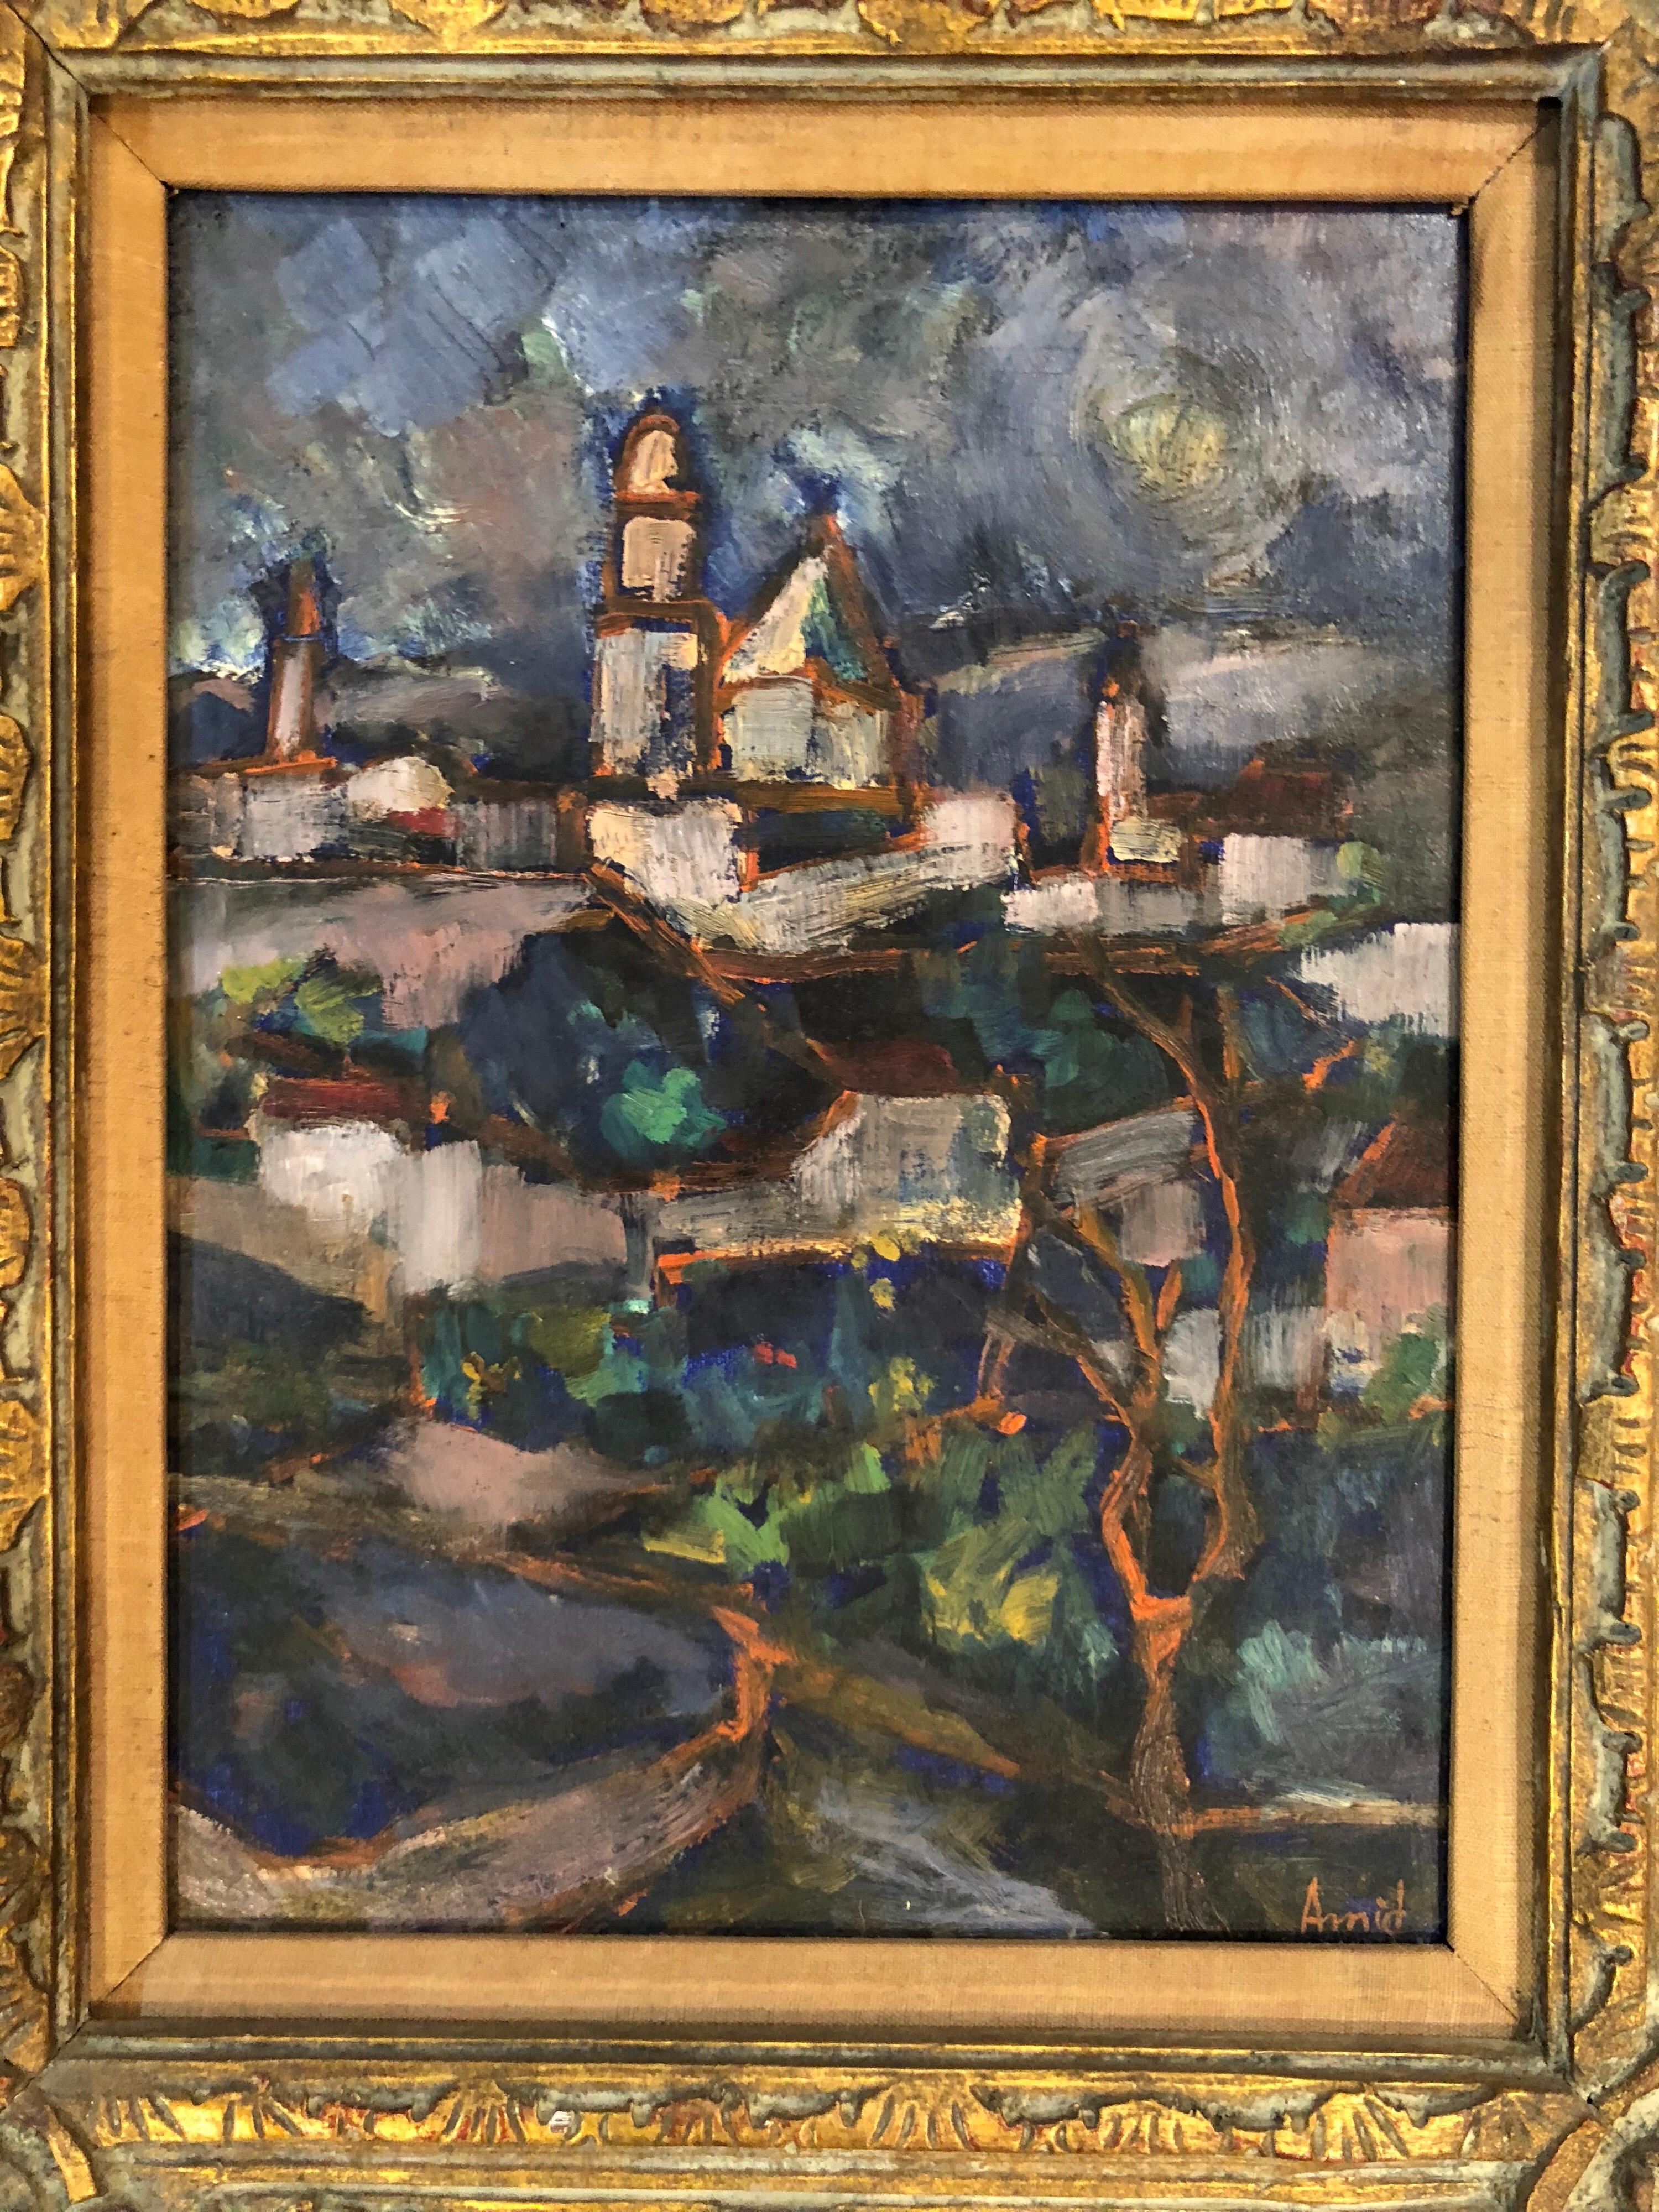 Original impressionist painting by Israeli artist Asher Amid. One of Israels most prominent contemporary artists. His painting 